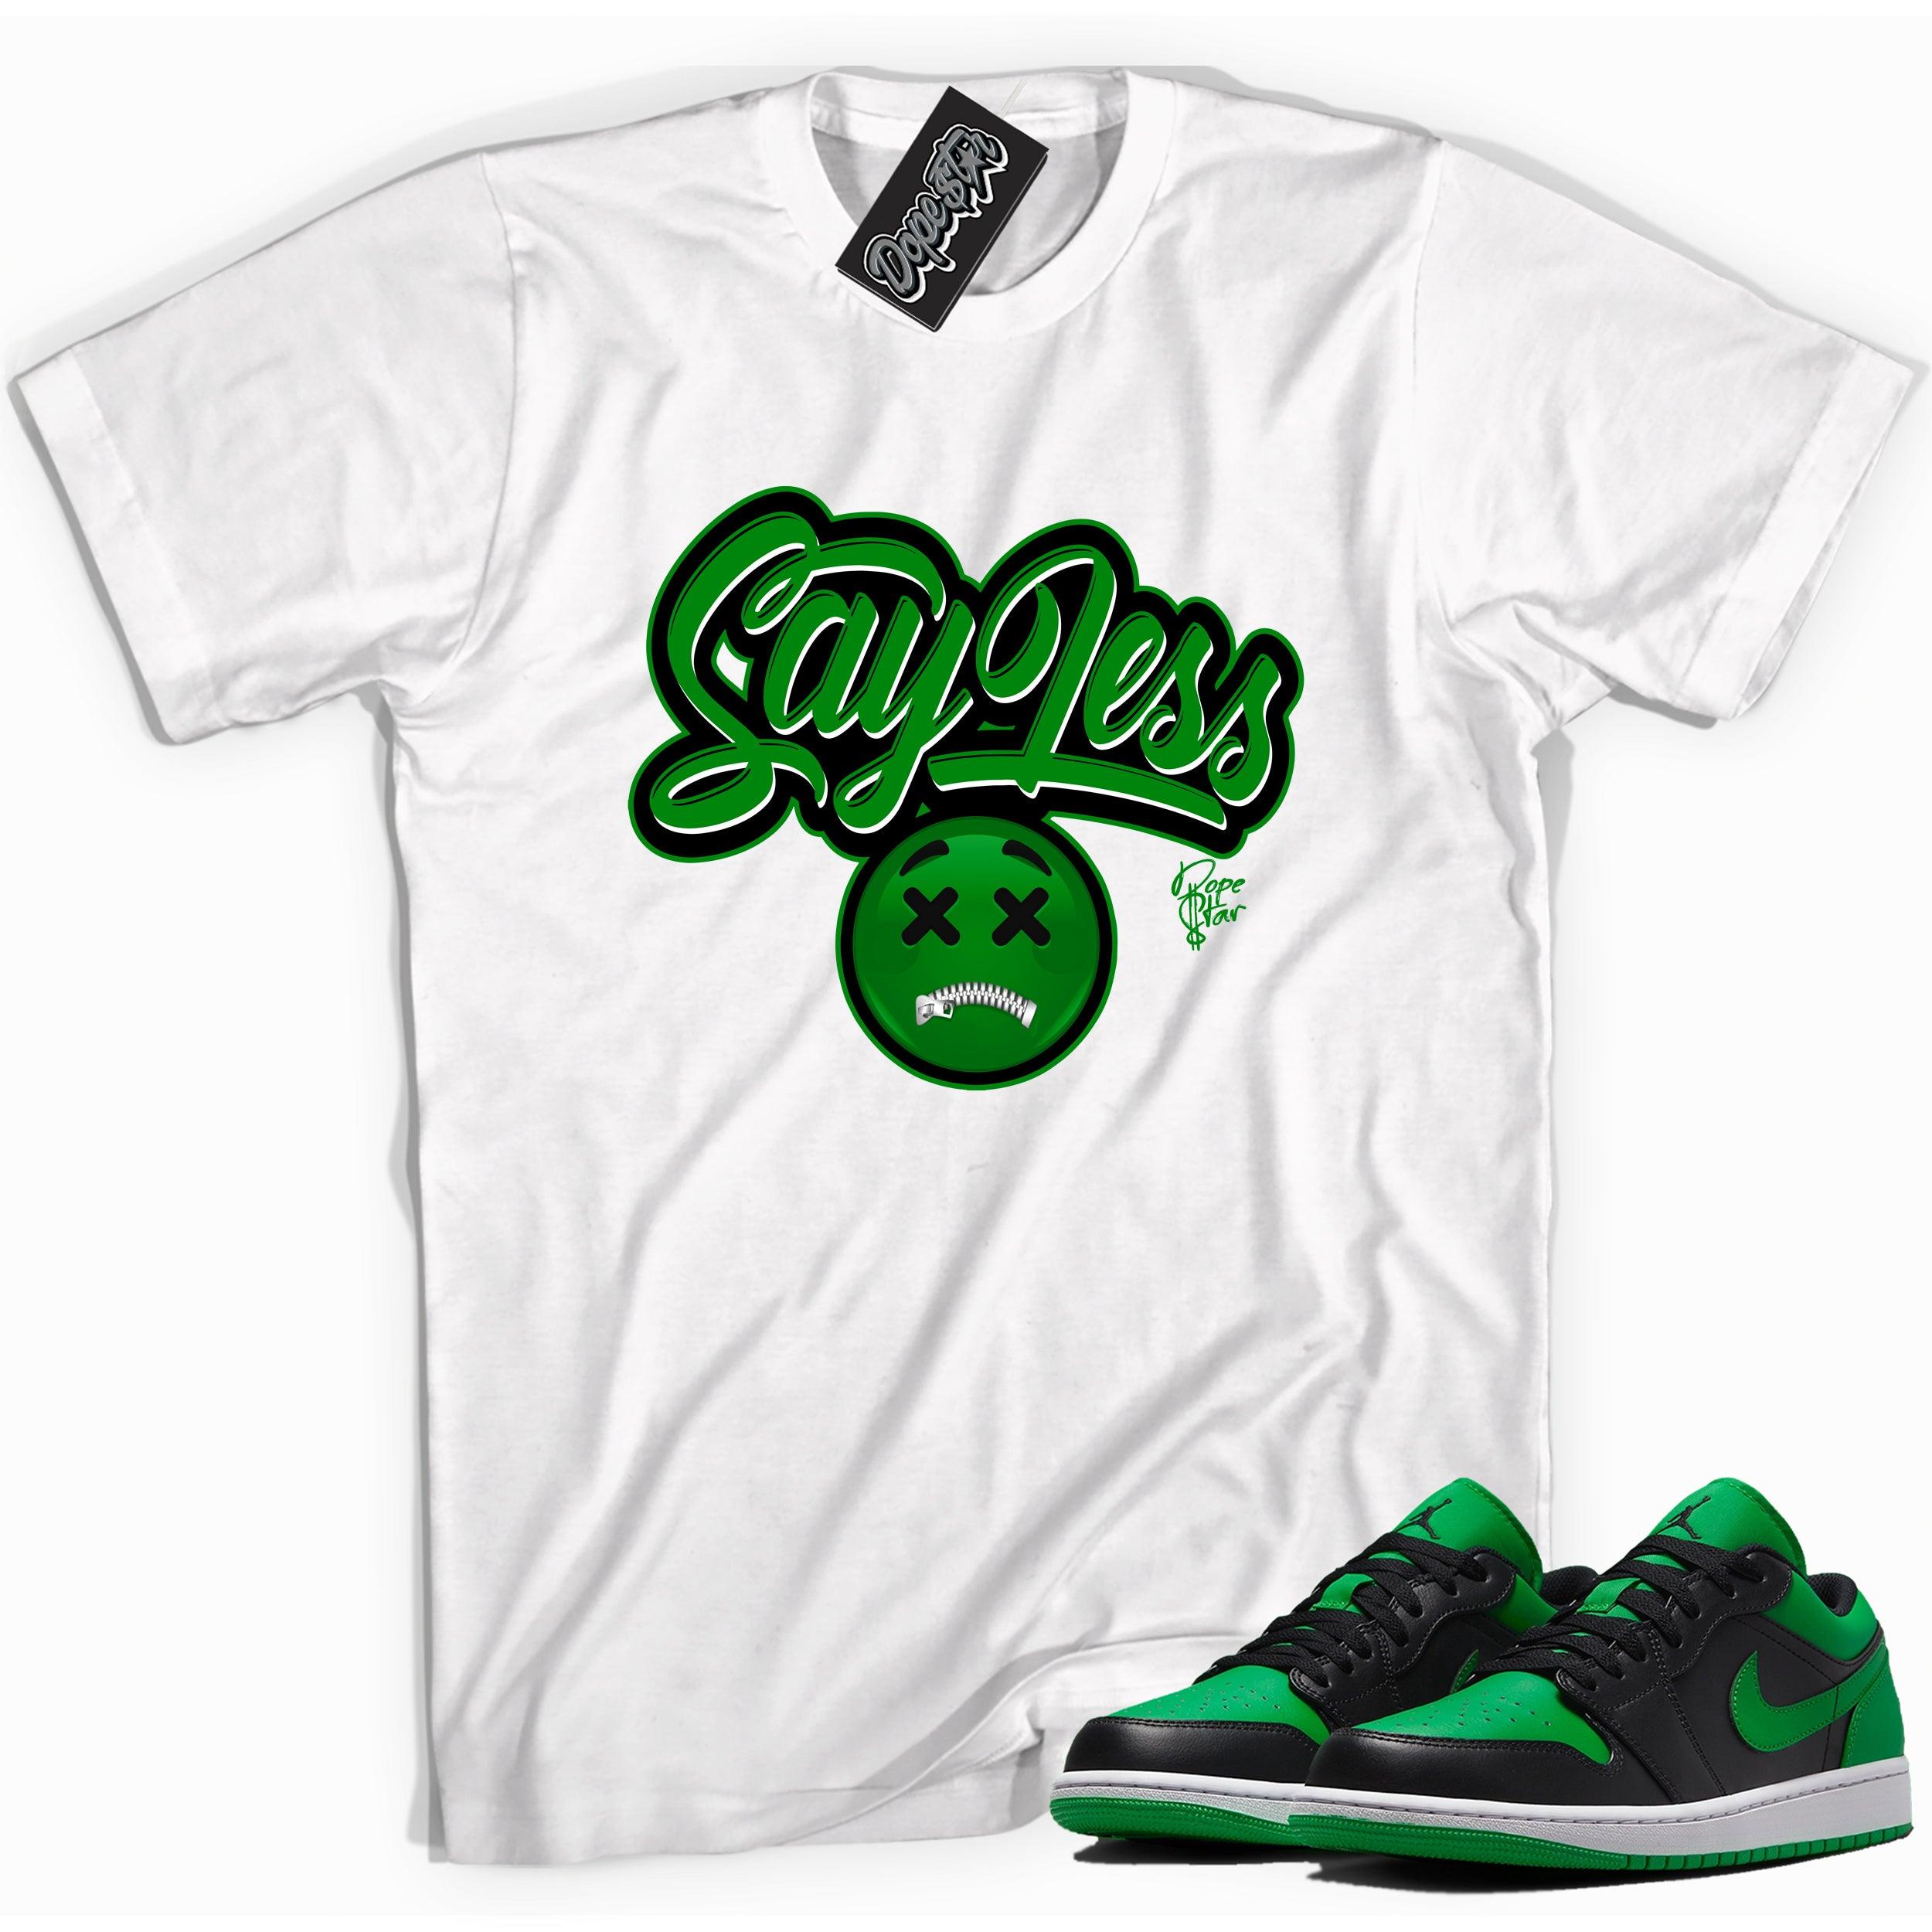 Cool white graphic tee with 'say less' print, that perfectly matches Air Jordan 1 Low Lucky Green sneakers